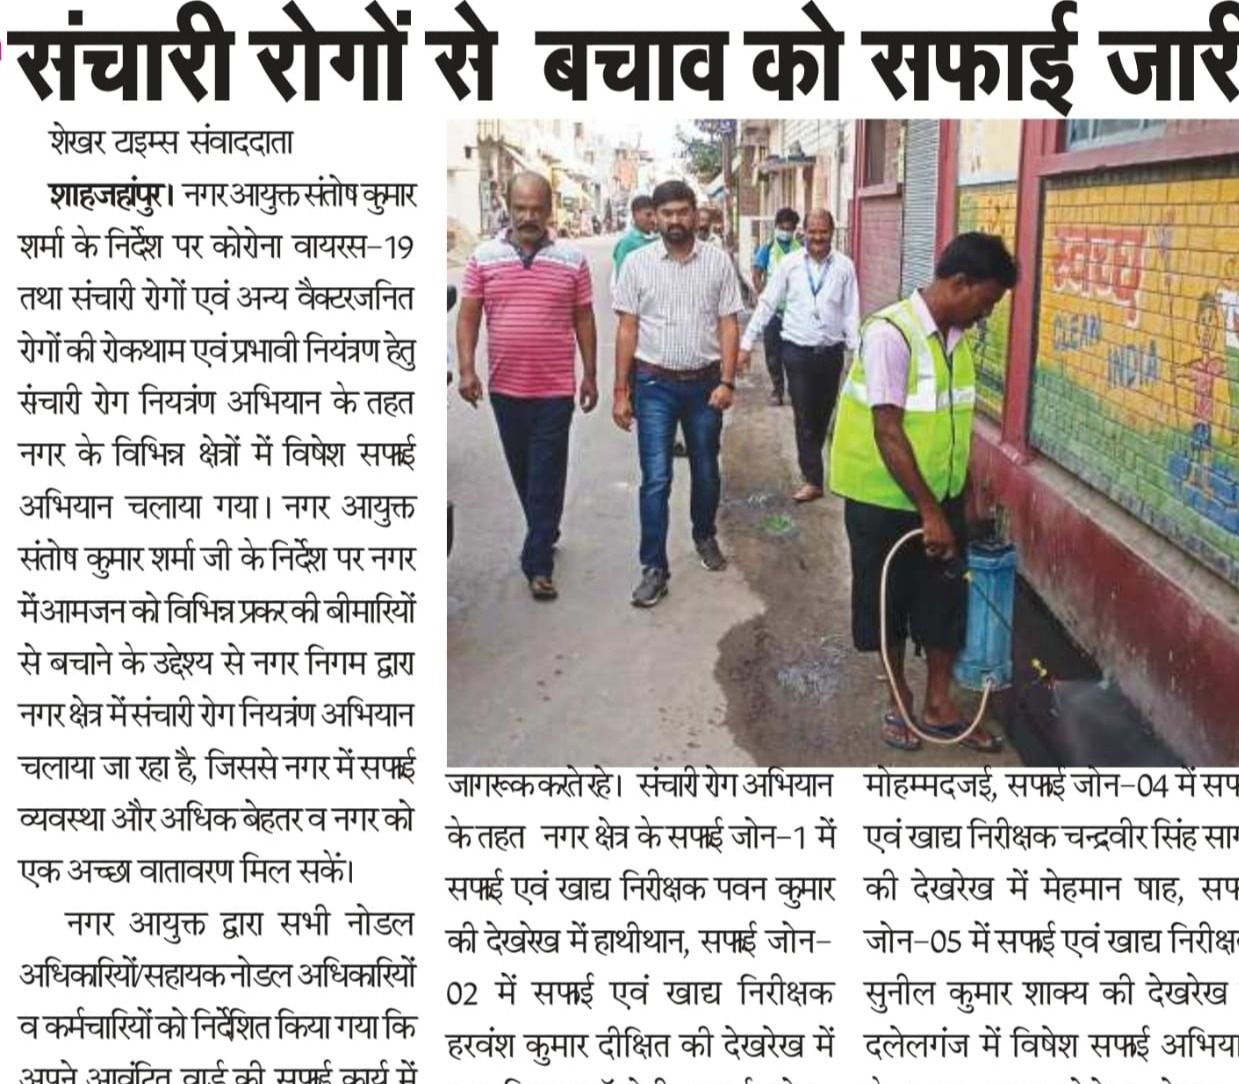 For the prevention of corona, a cleanliness campaign was carried out in the city on the instructions of Municipal Commissioner.